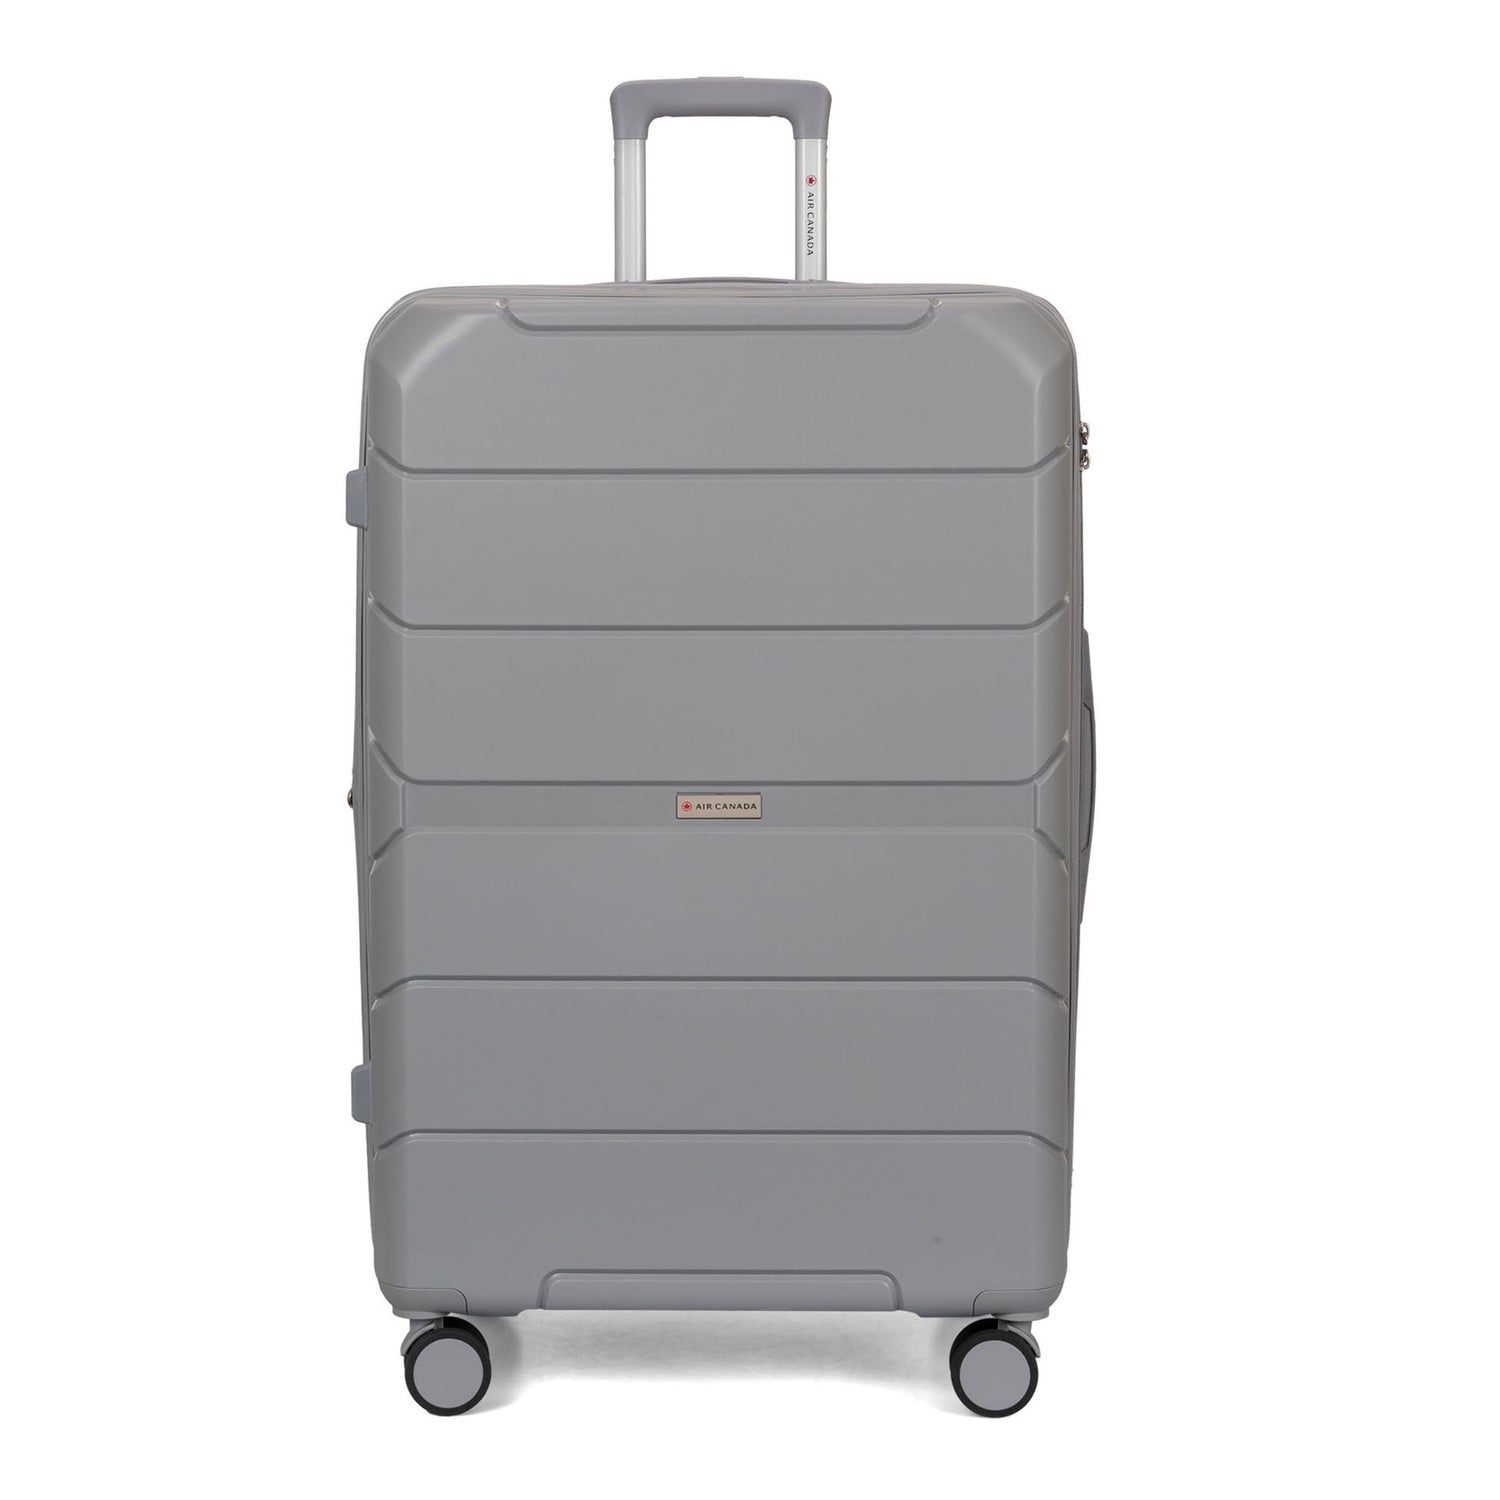 Front side view of a grey hard side luggage called Altitude designed by Air Canada sold at Bentley, showcasing its telescopic handle and resistant shell texture.